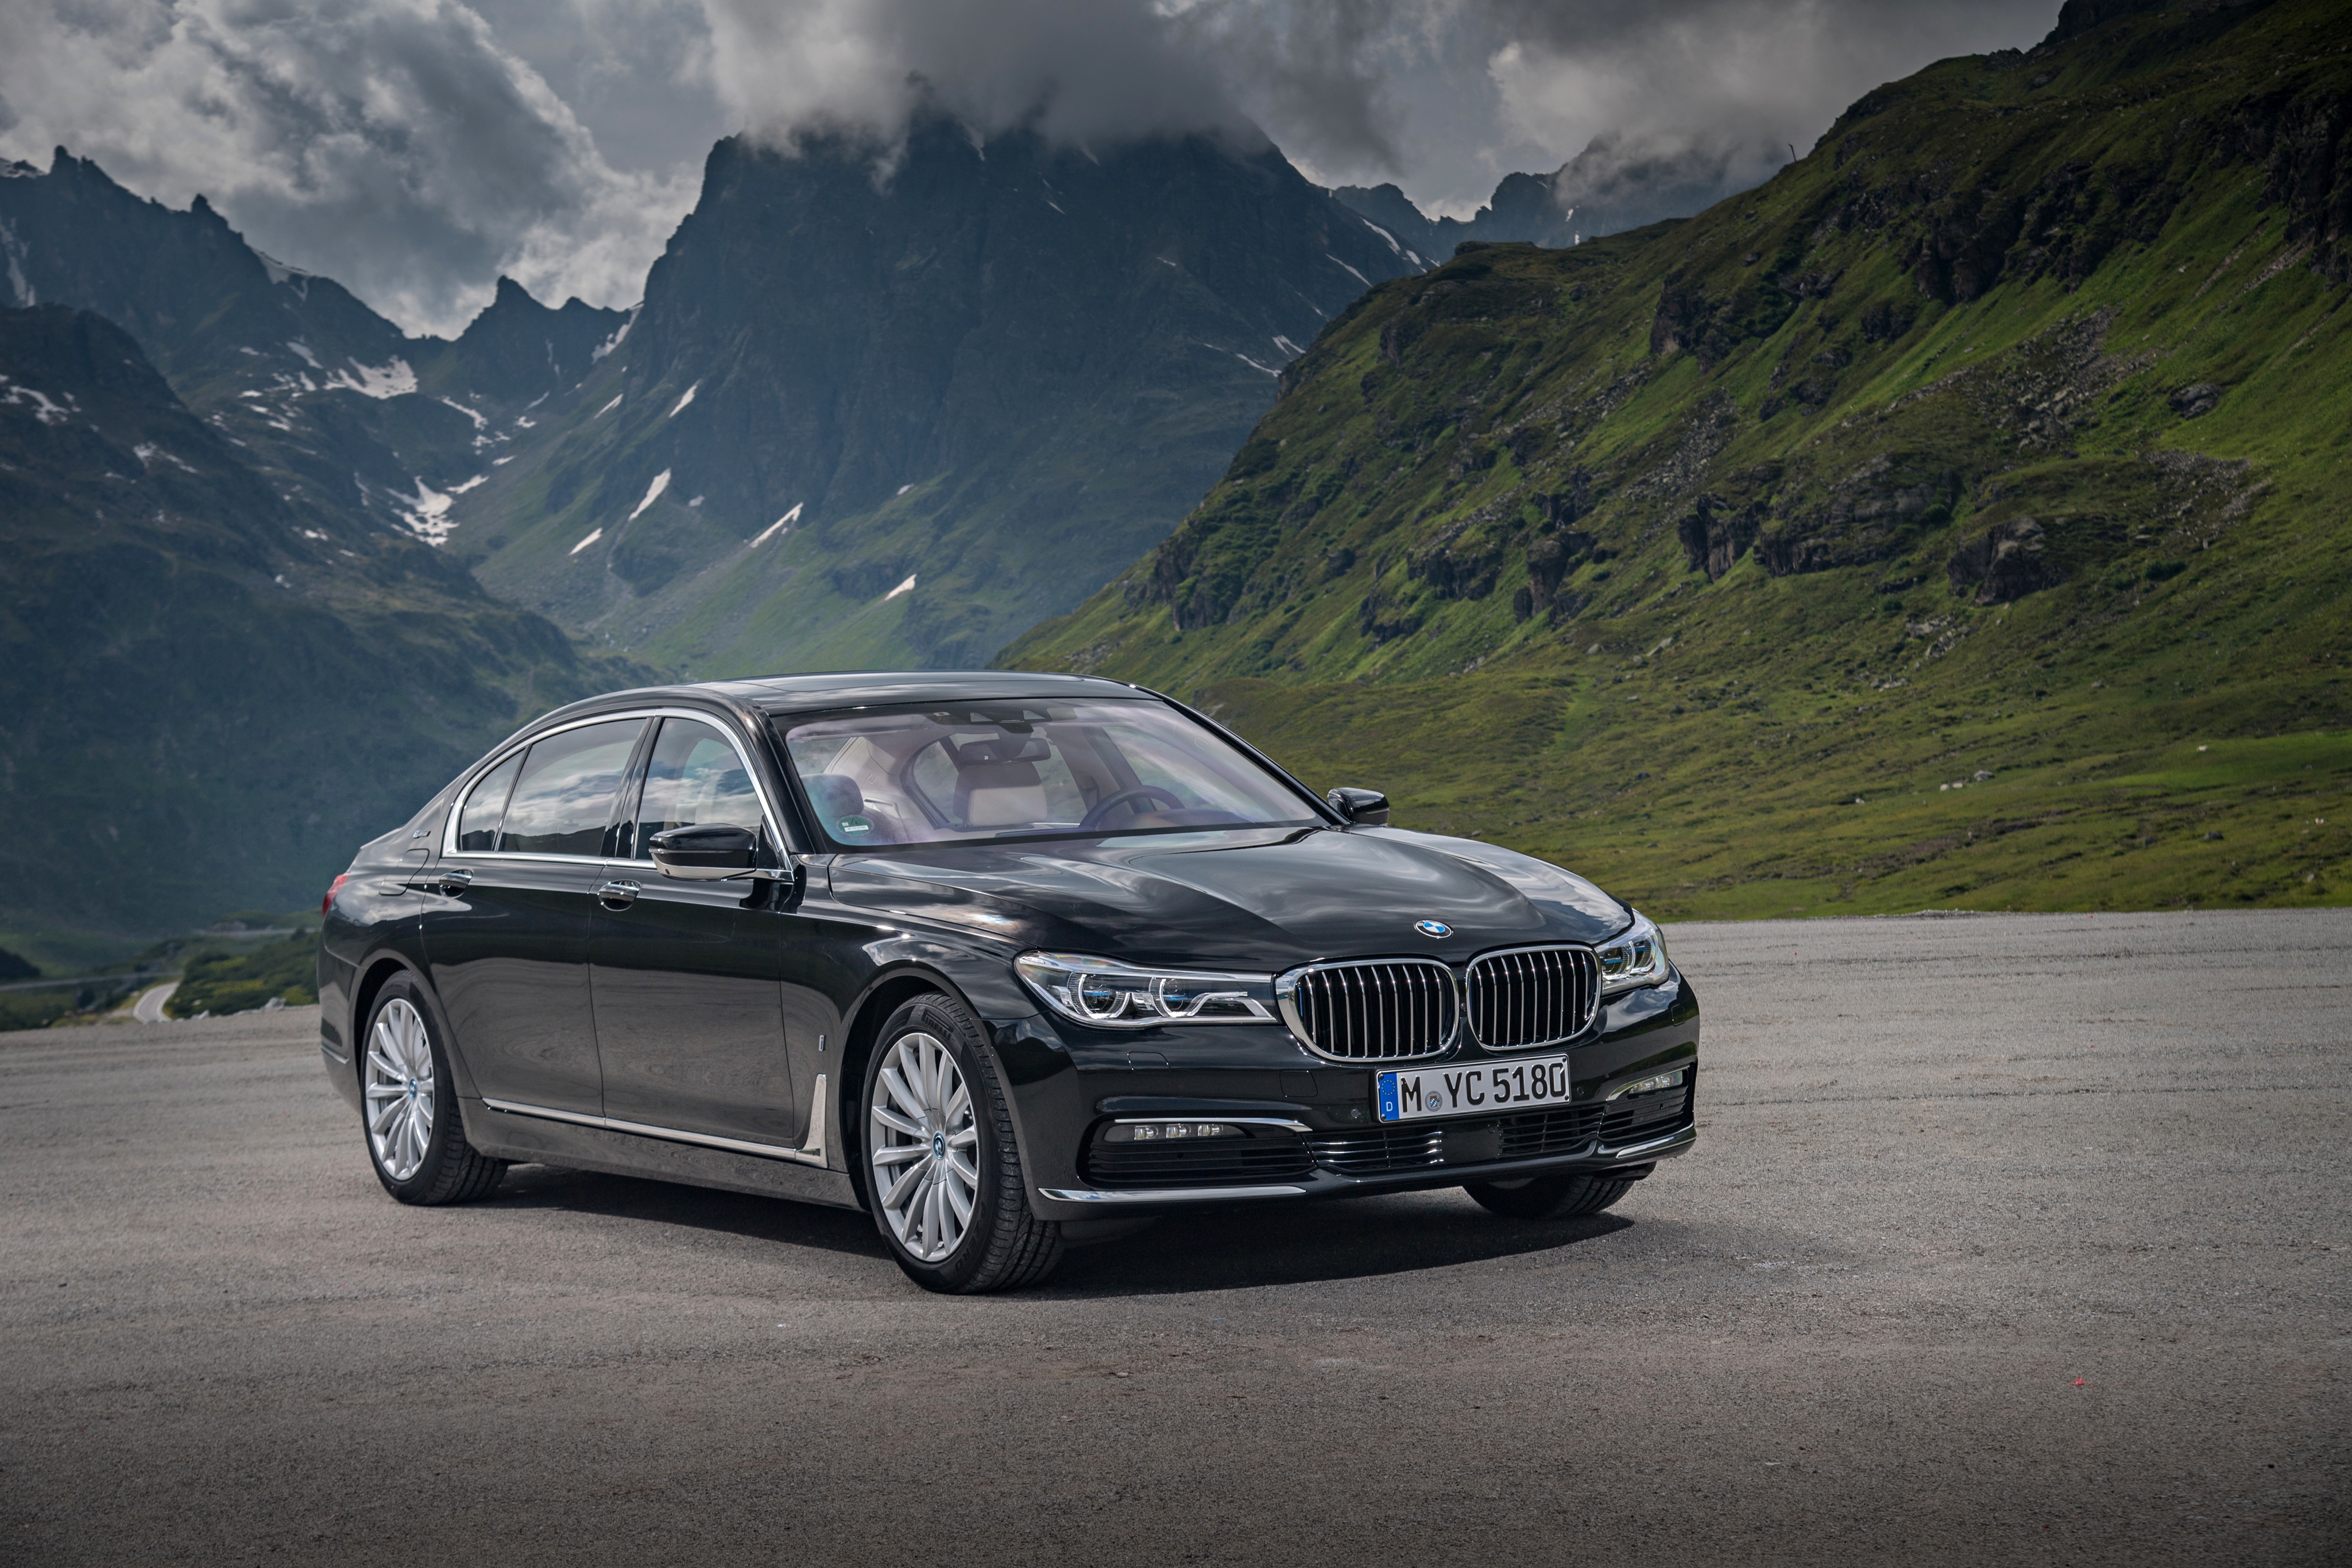 Wallpapers wallpaper bmw 7 series cars mountains on the desktop